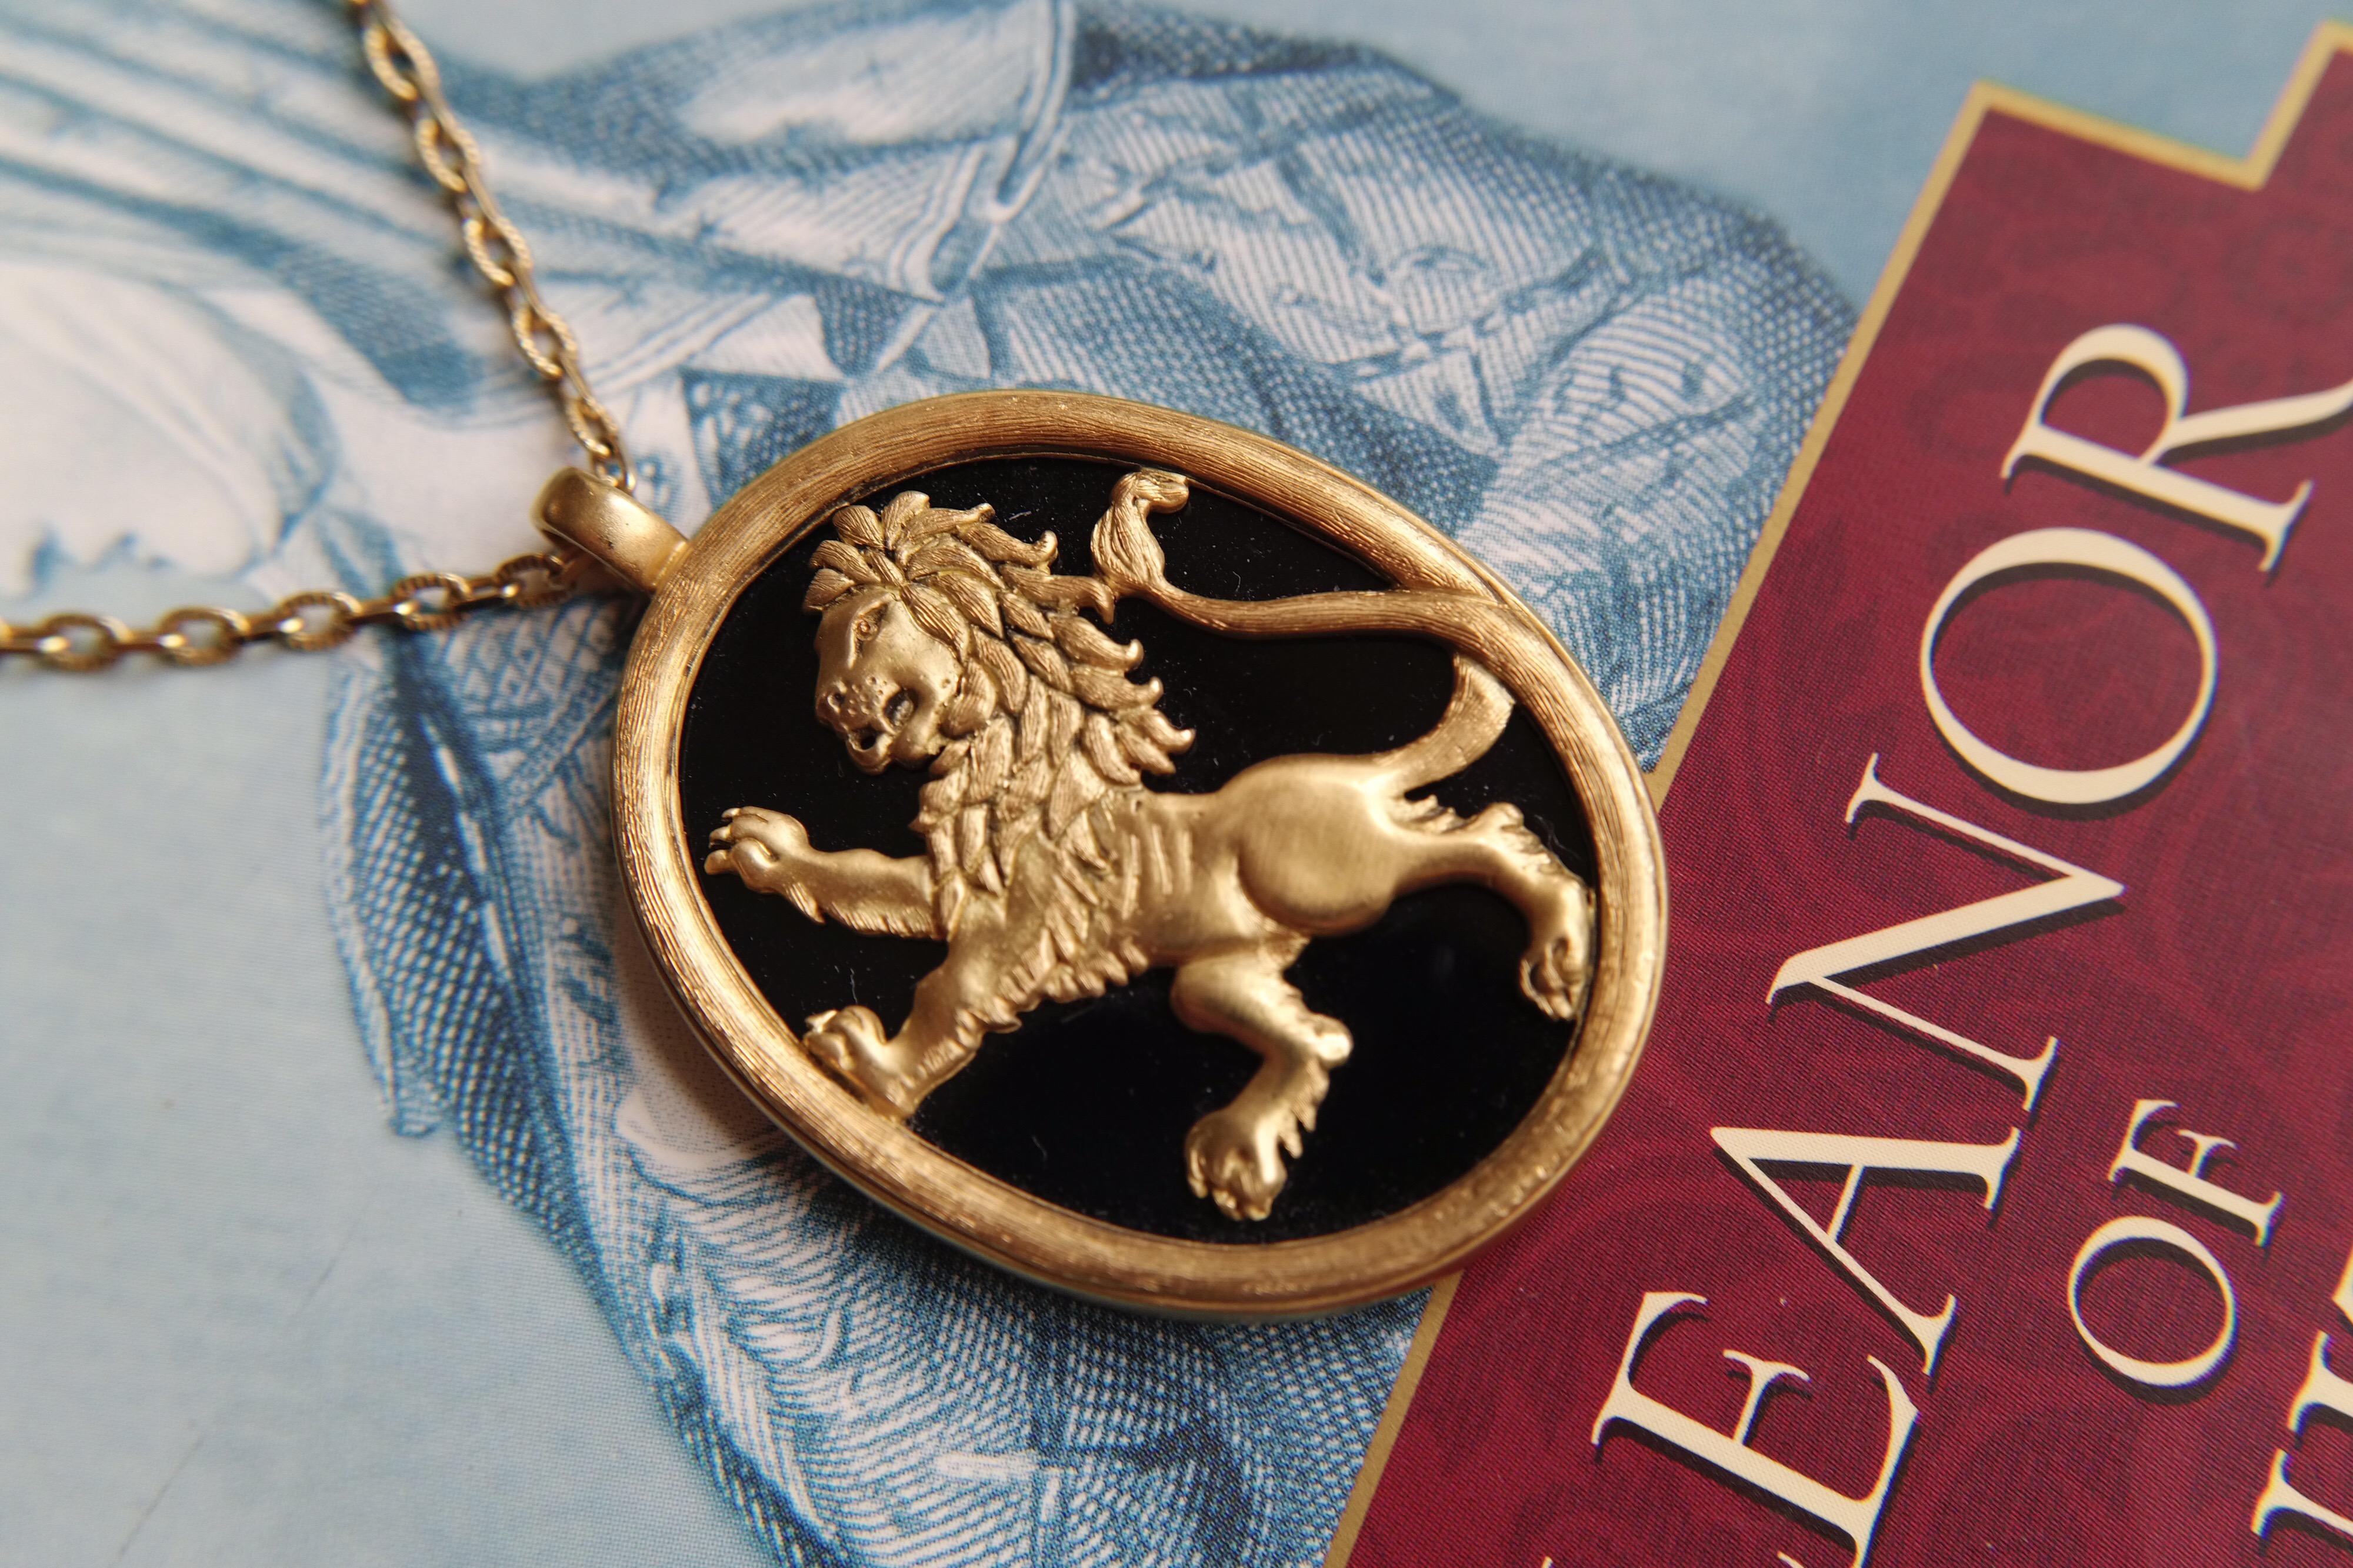 Cabochon Wendy Brandes Onyx and 18K Yellow Gold Lion Leo Zodiac Pendant Necklace